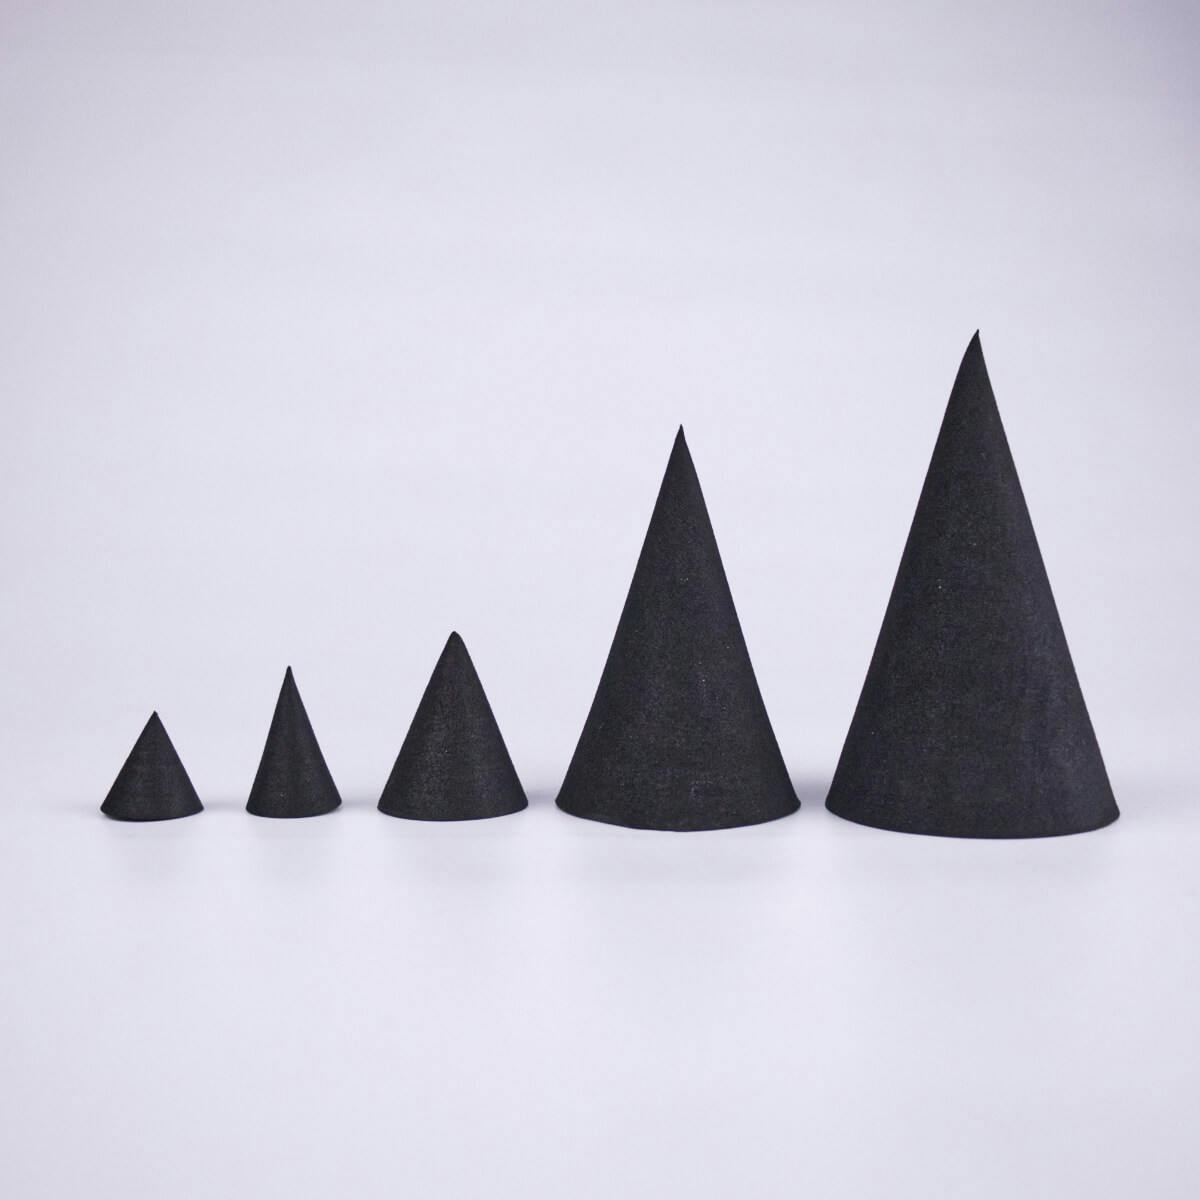 Foam cones ordered from smallest to largest